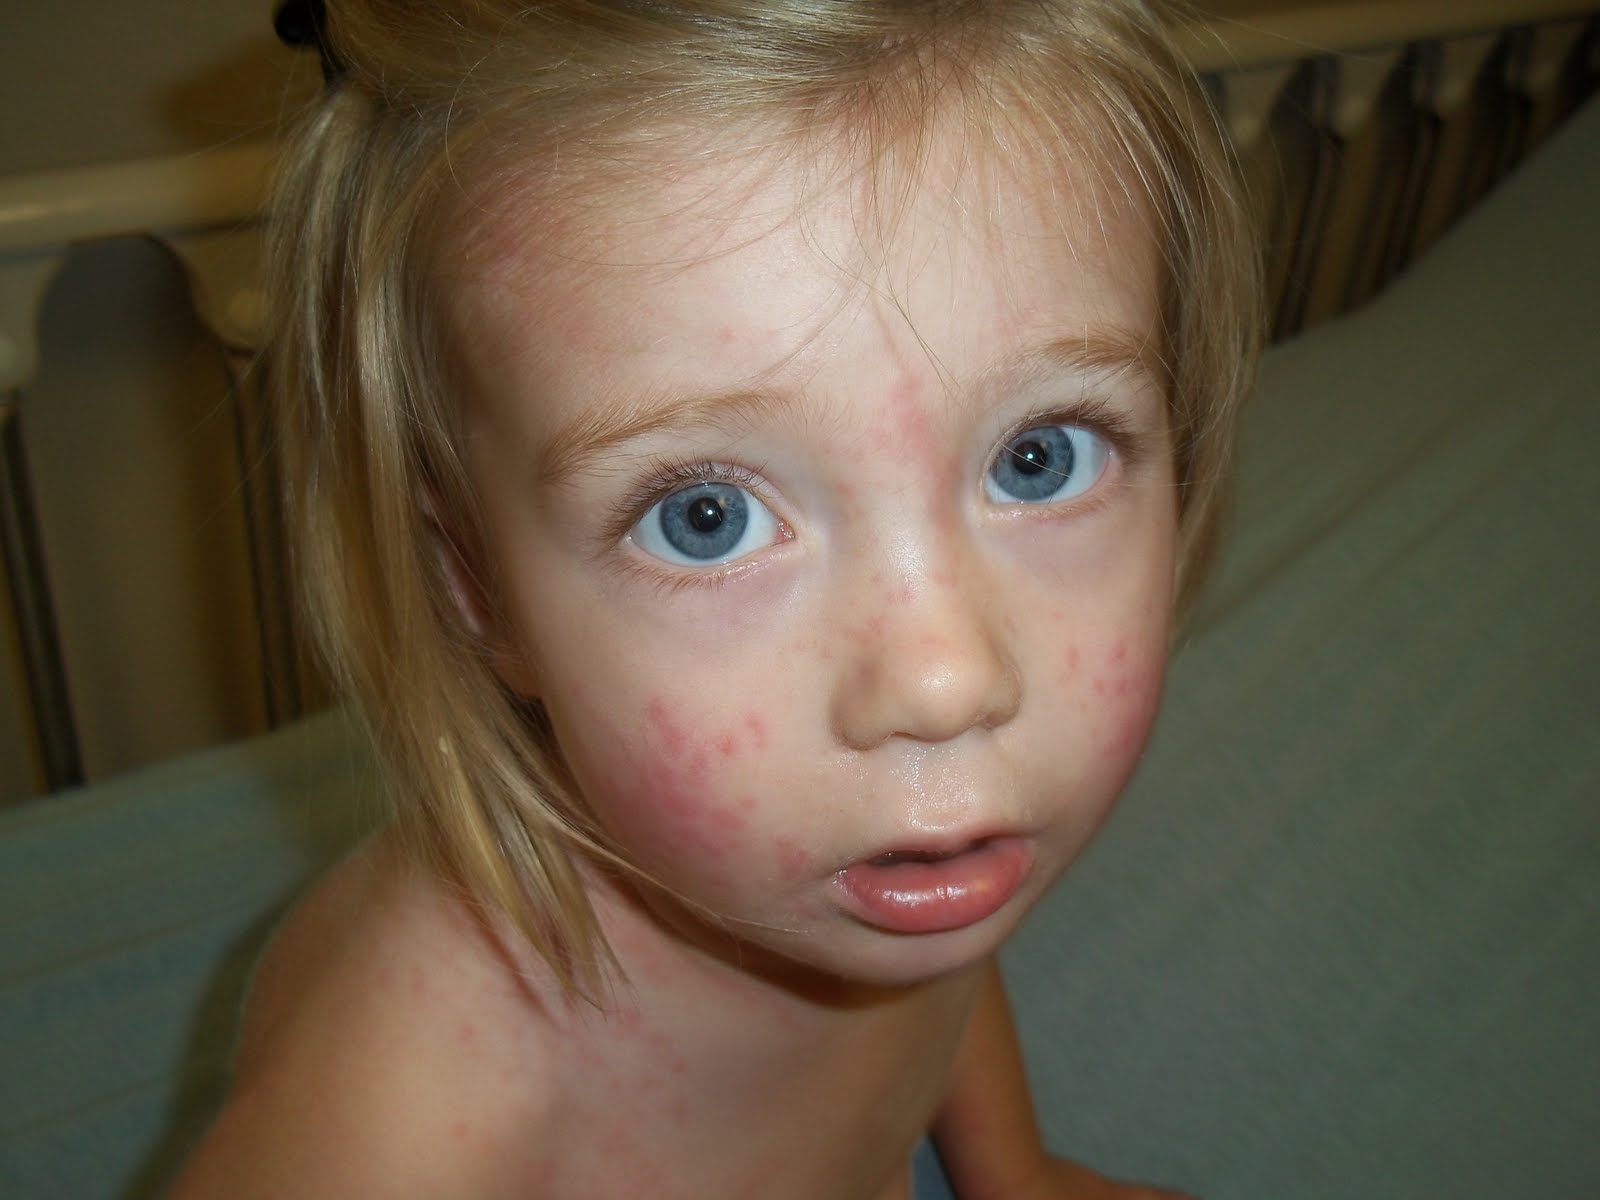 Infant, Toddler and Children, Rashes - Ask Dr. Sears